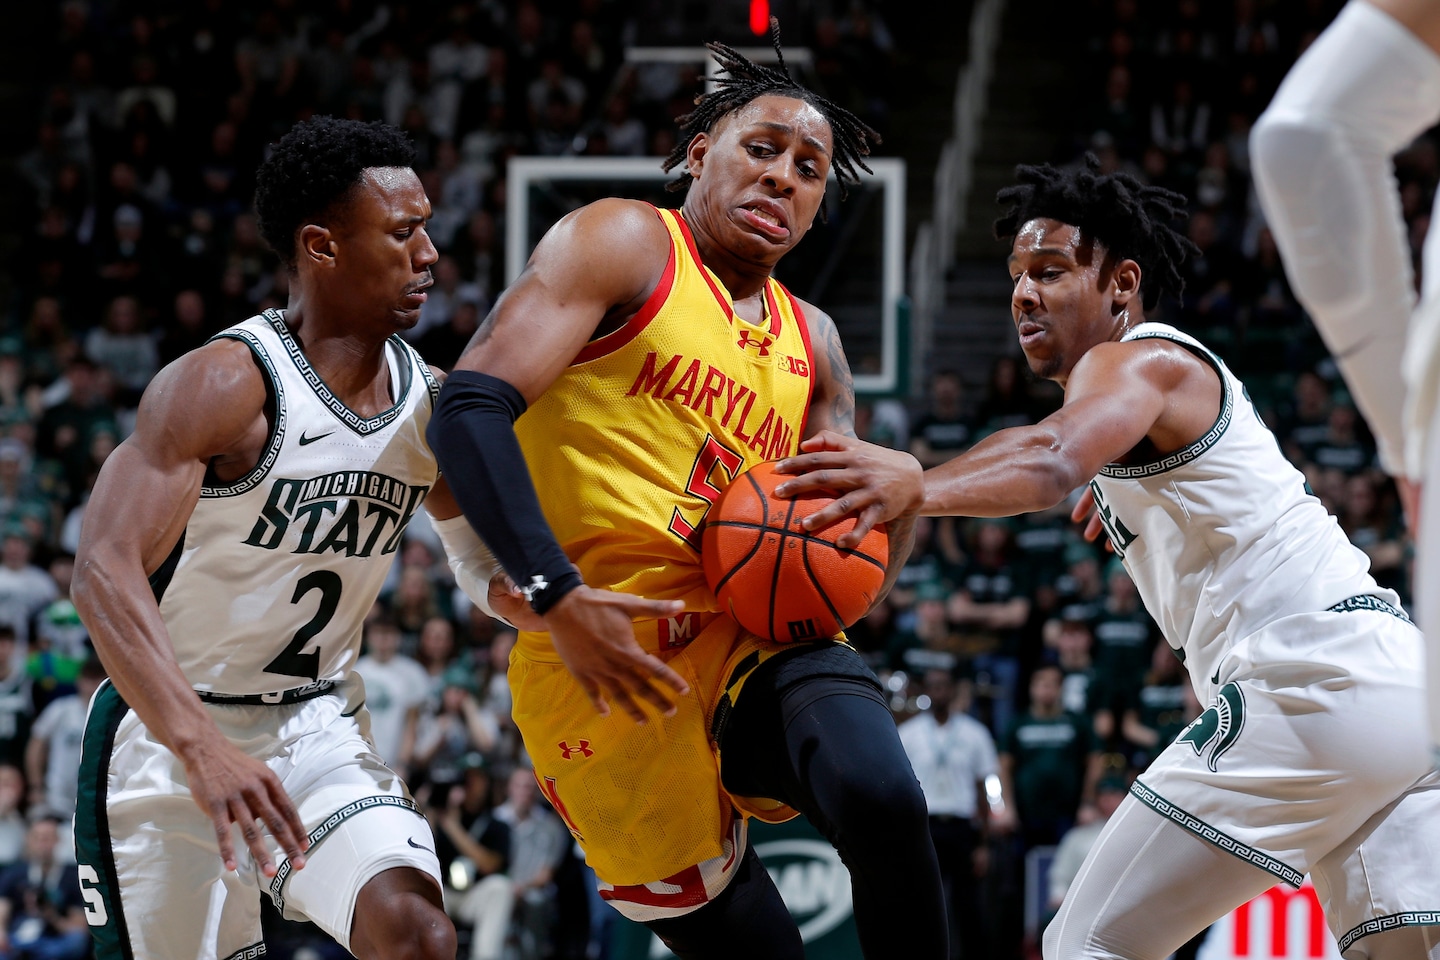 Cold-shooting Maryland suffers more heartache at Michigan State